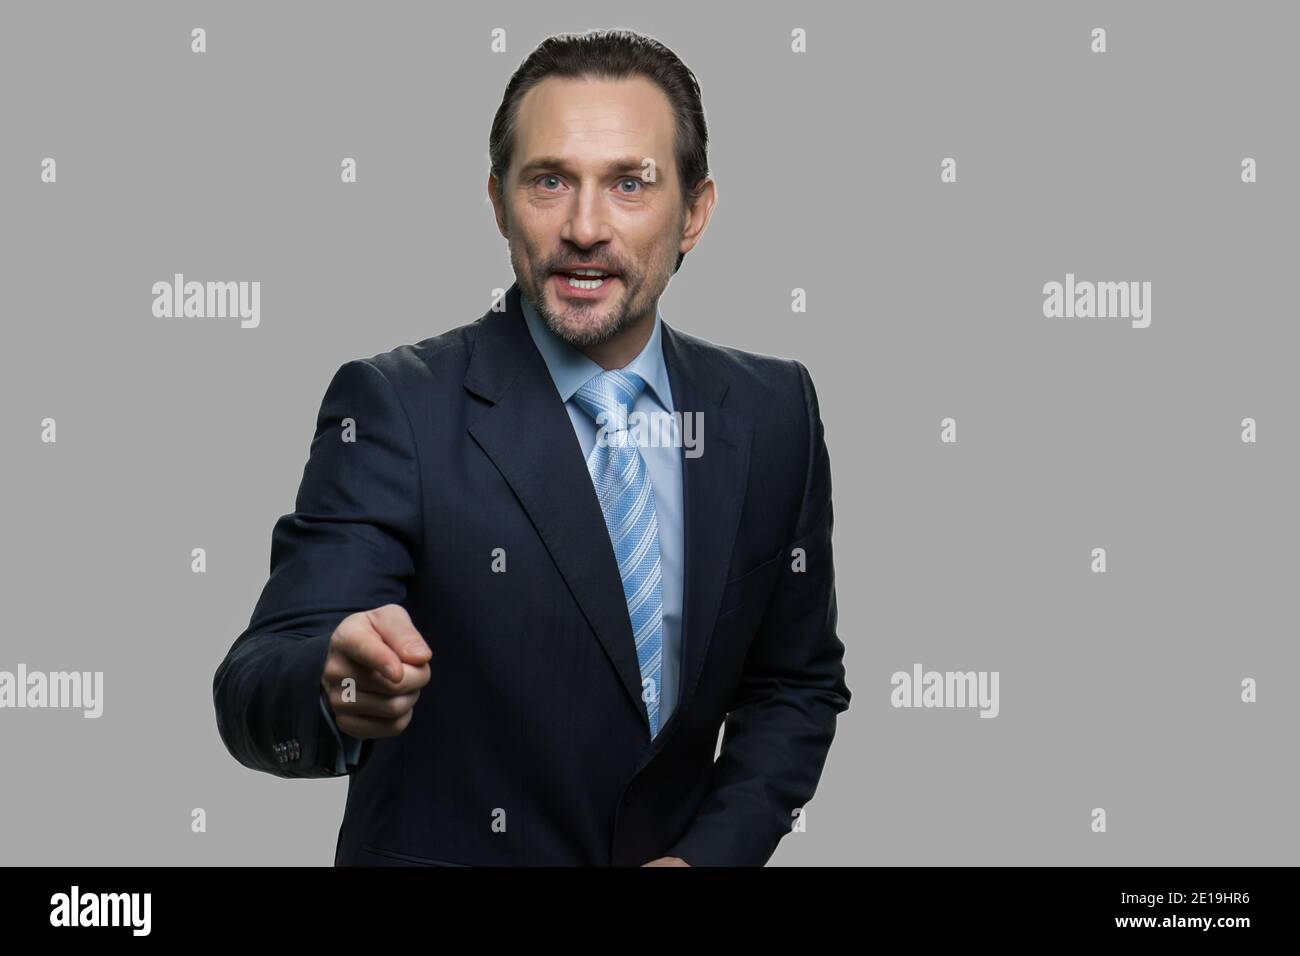 Aggressive businessman shouting and pointing to camera. Stock Photo